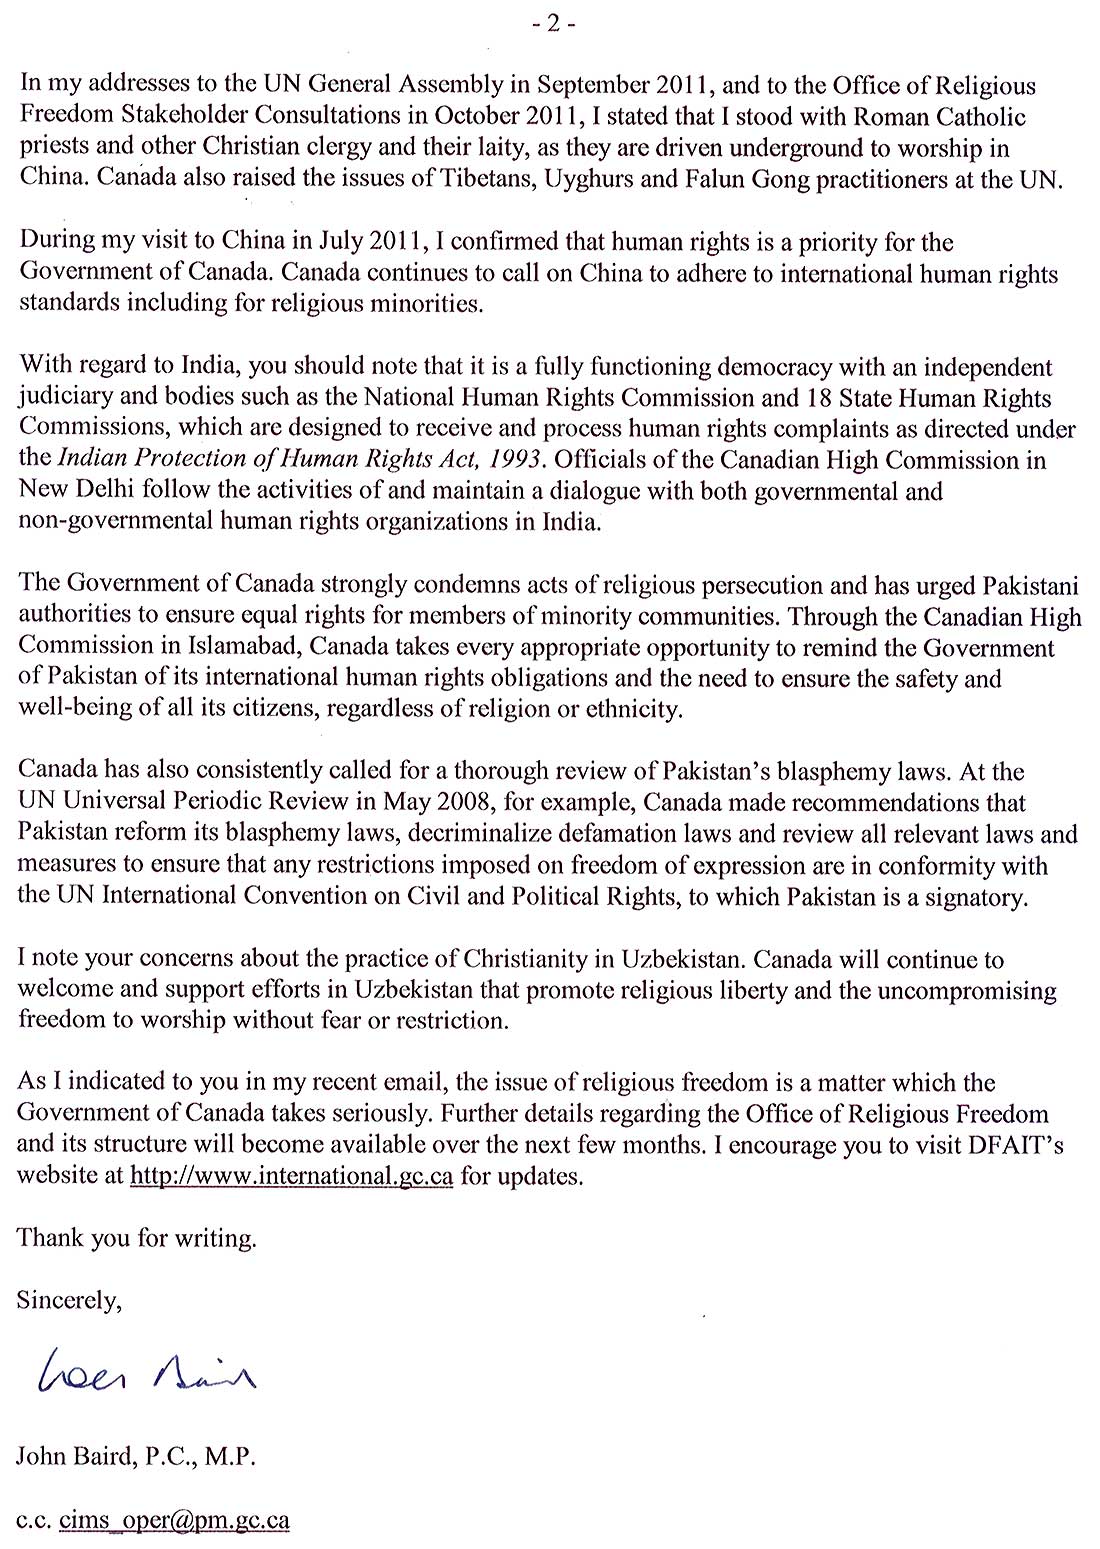 Letter from John Baird, Minister of Foreign Affairs, Canada 